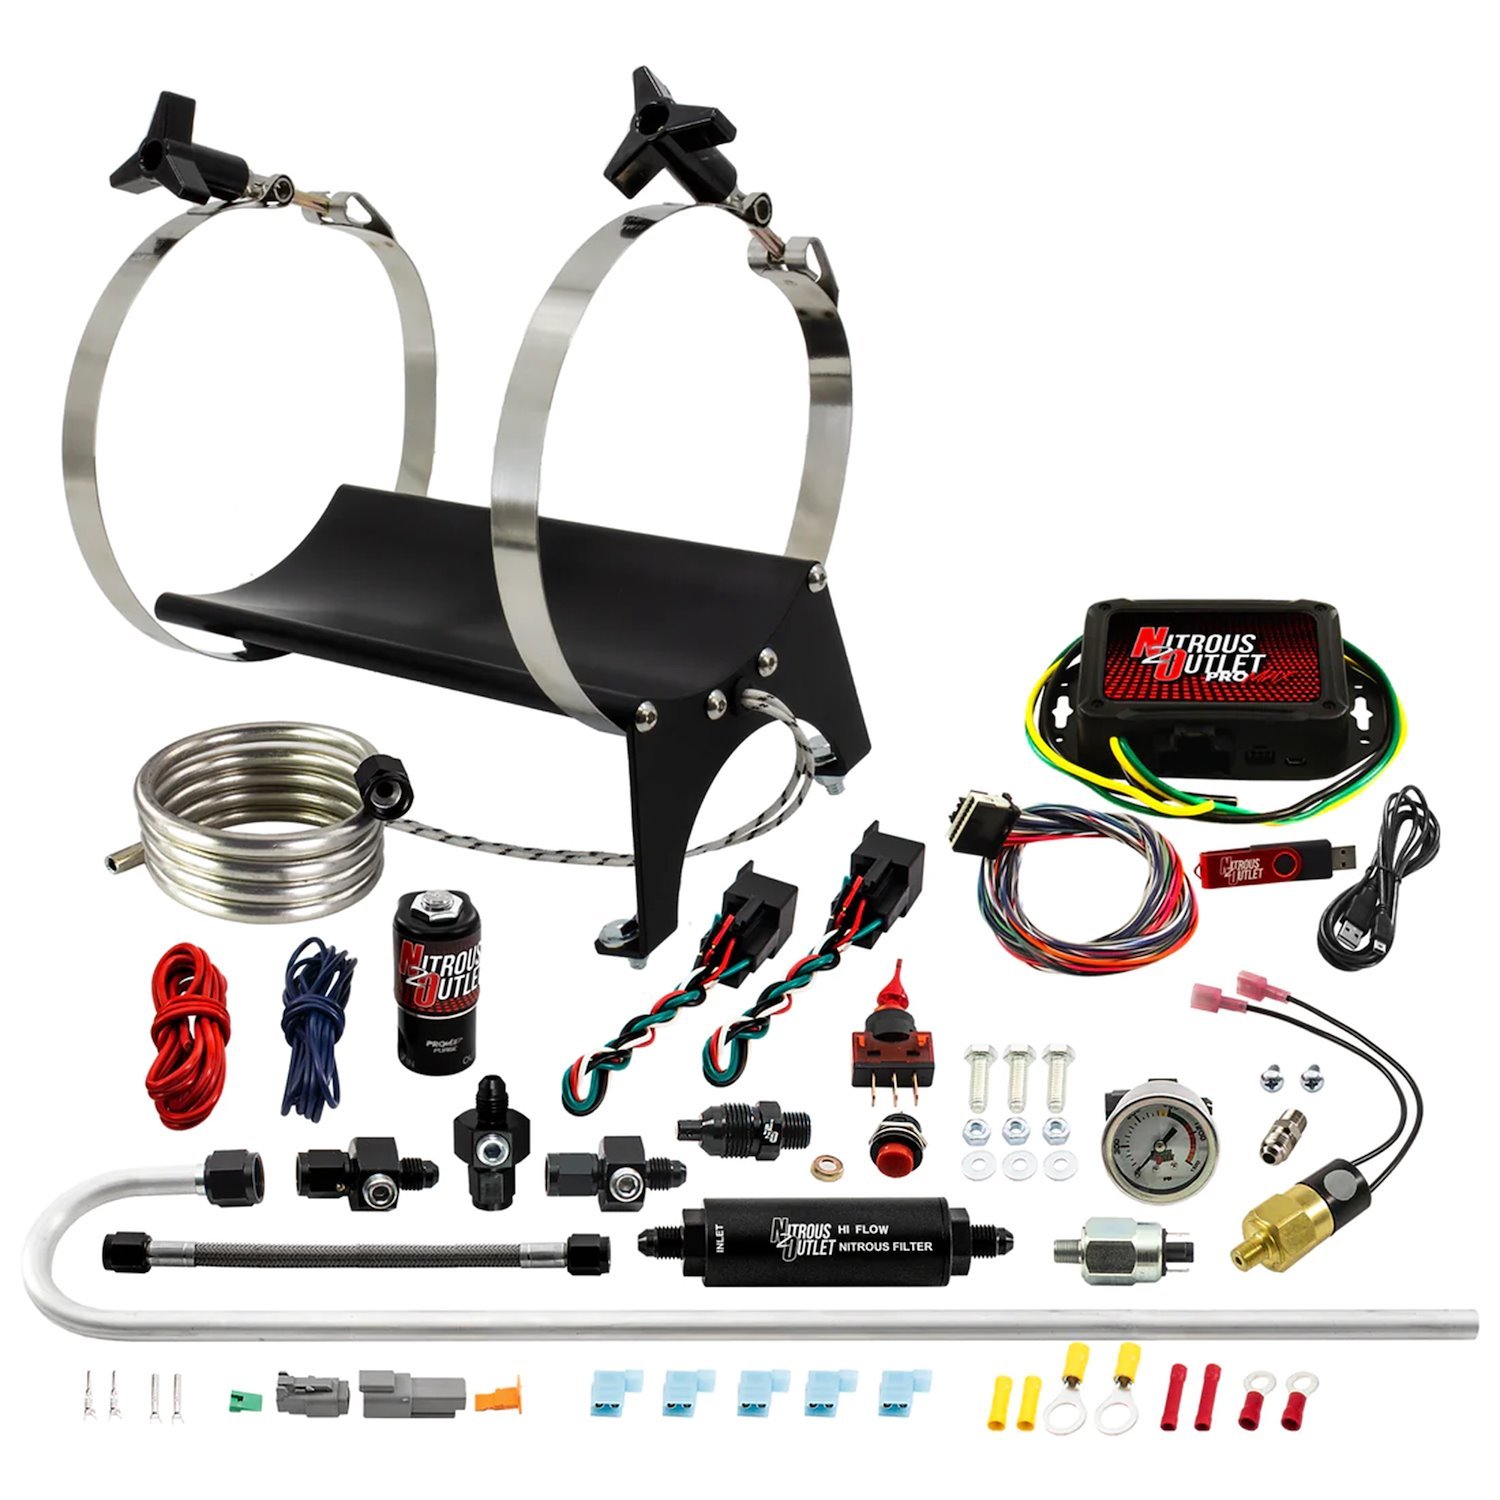 00-69003-H4 Ultimate Nitrous Accessory Package, ProMax, High Fuel Pressure/4AN